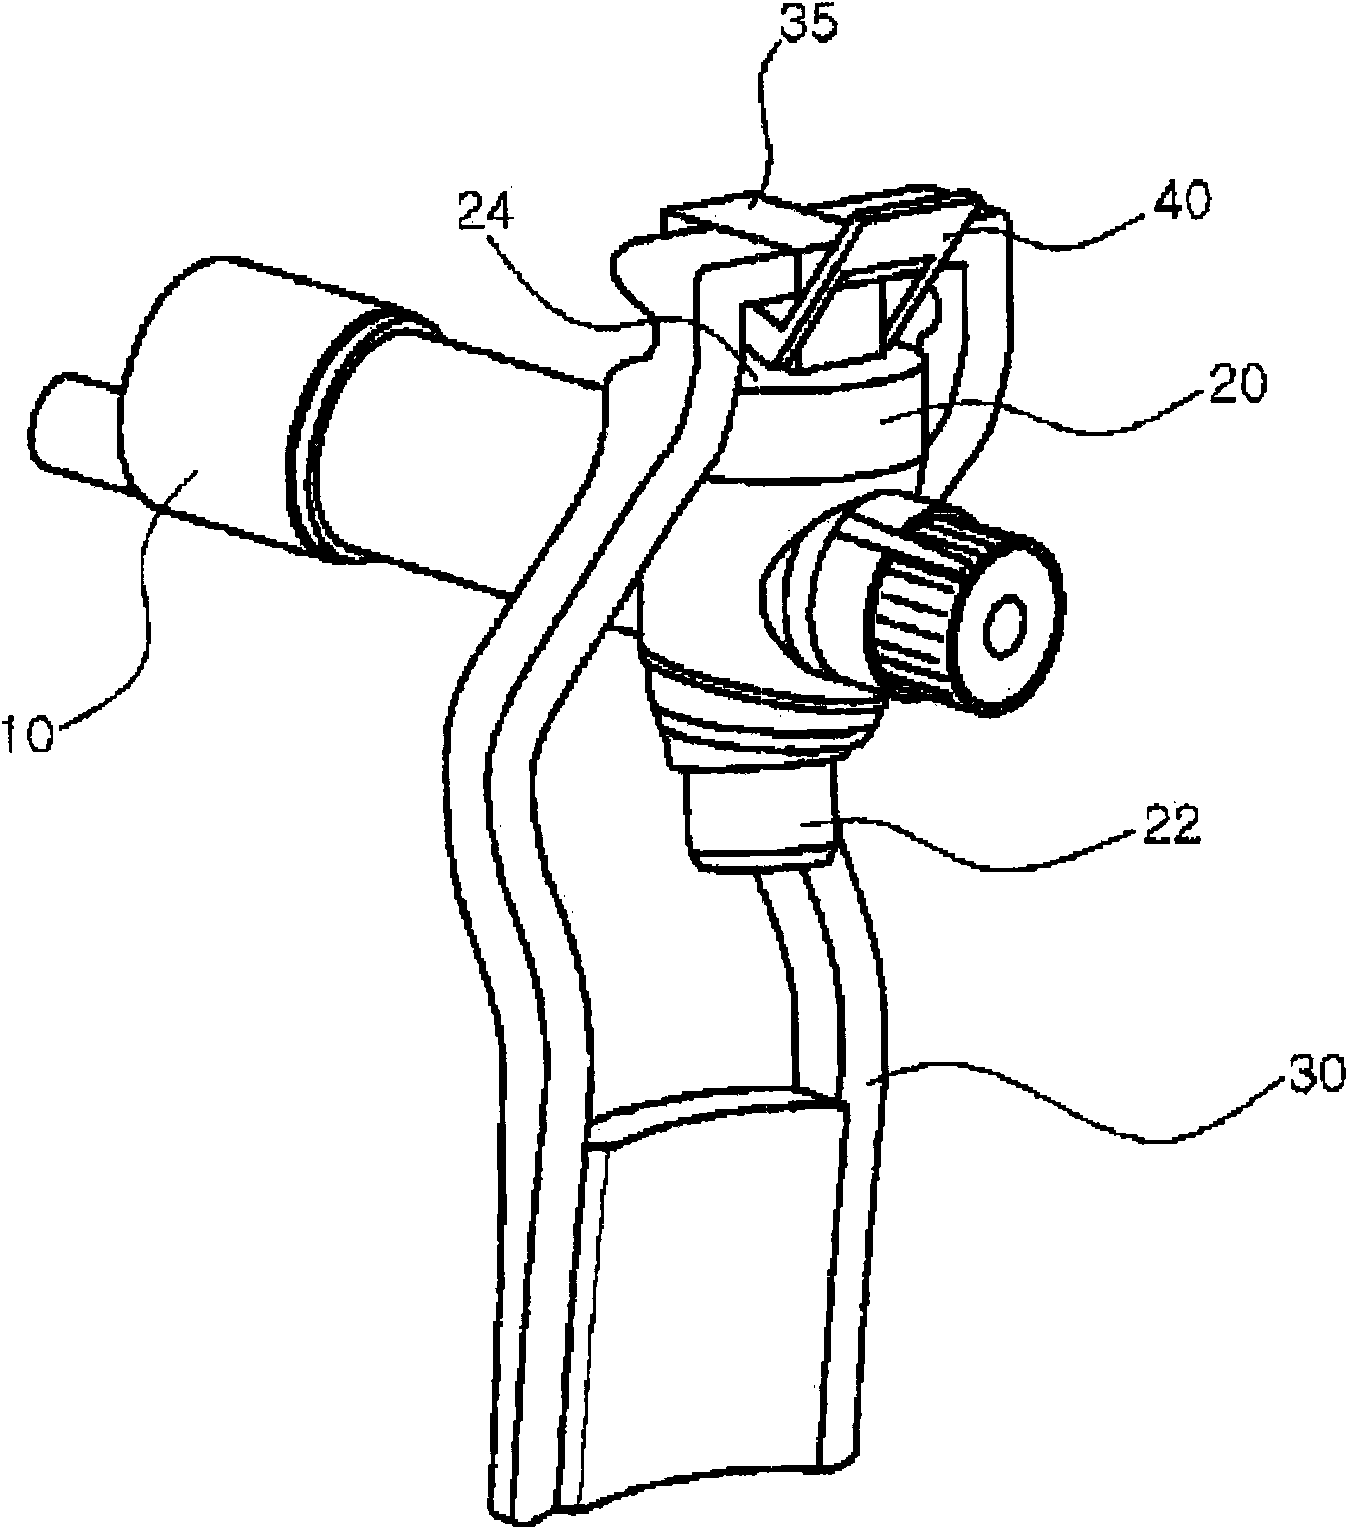 Cock for water purifier having auxiliary lever dispensing water continuously